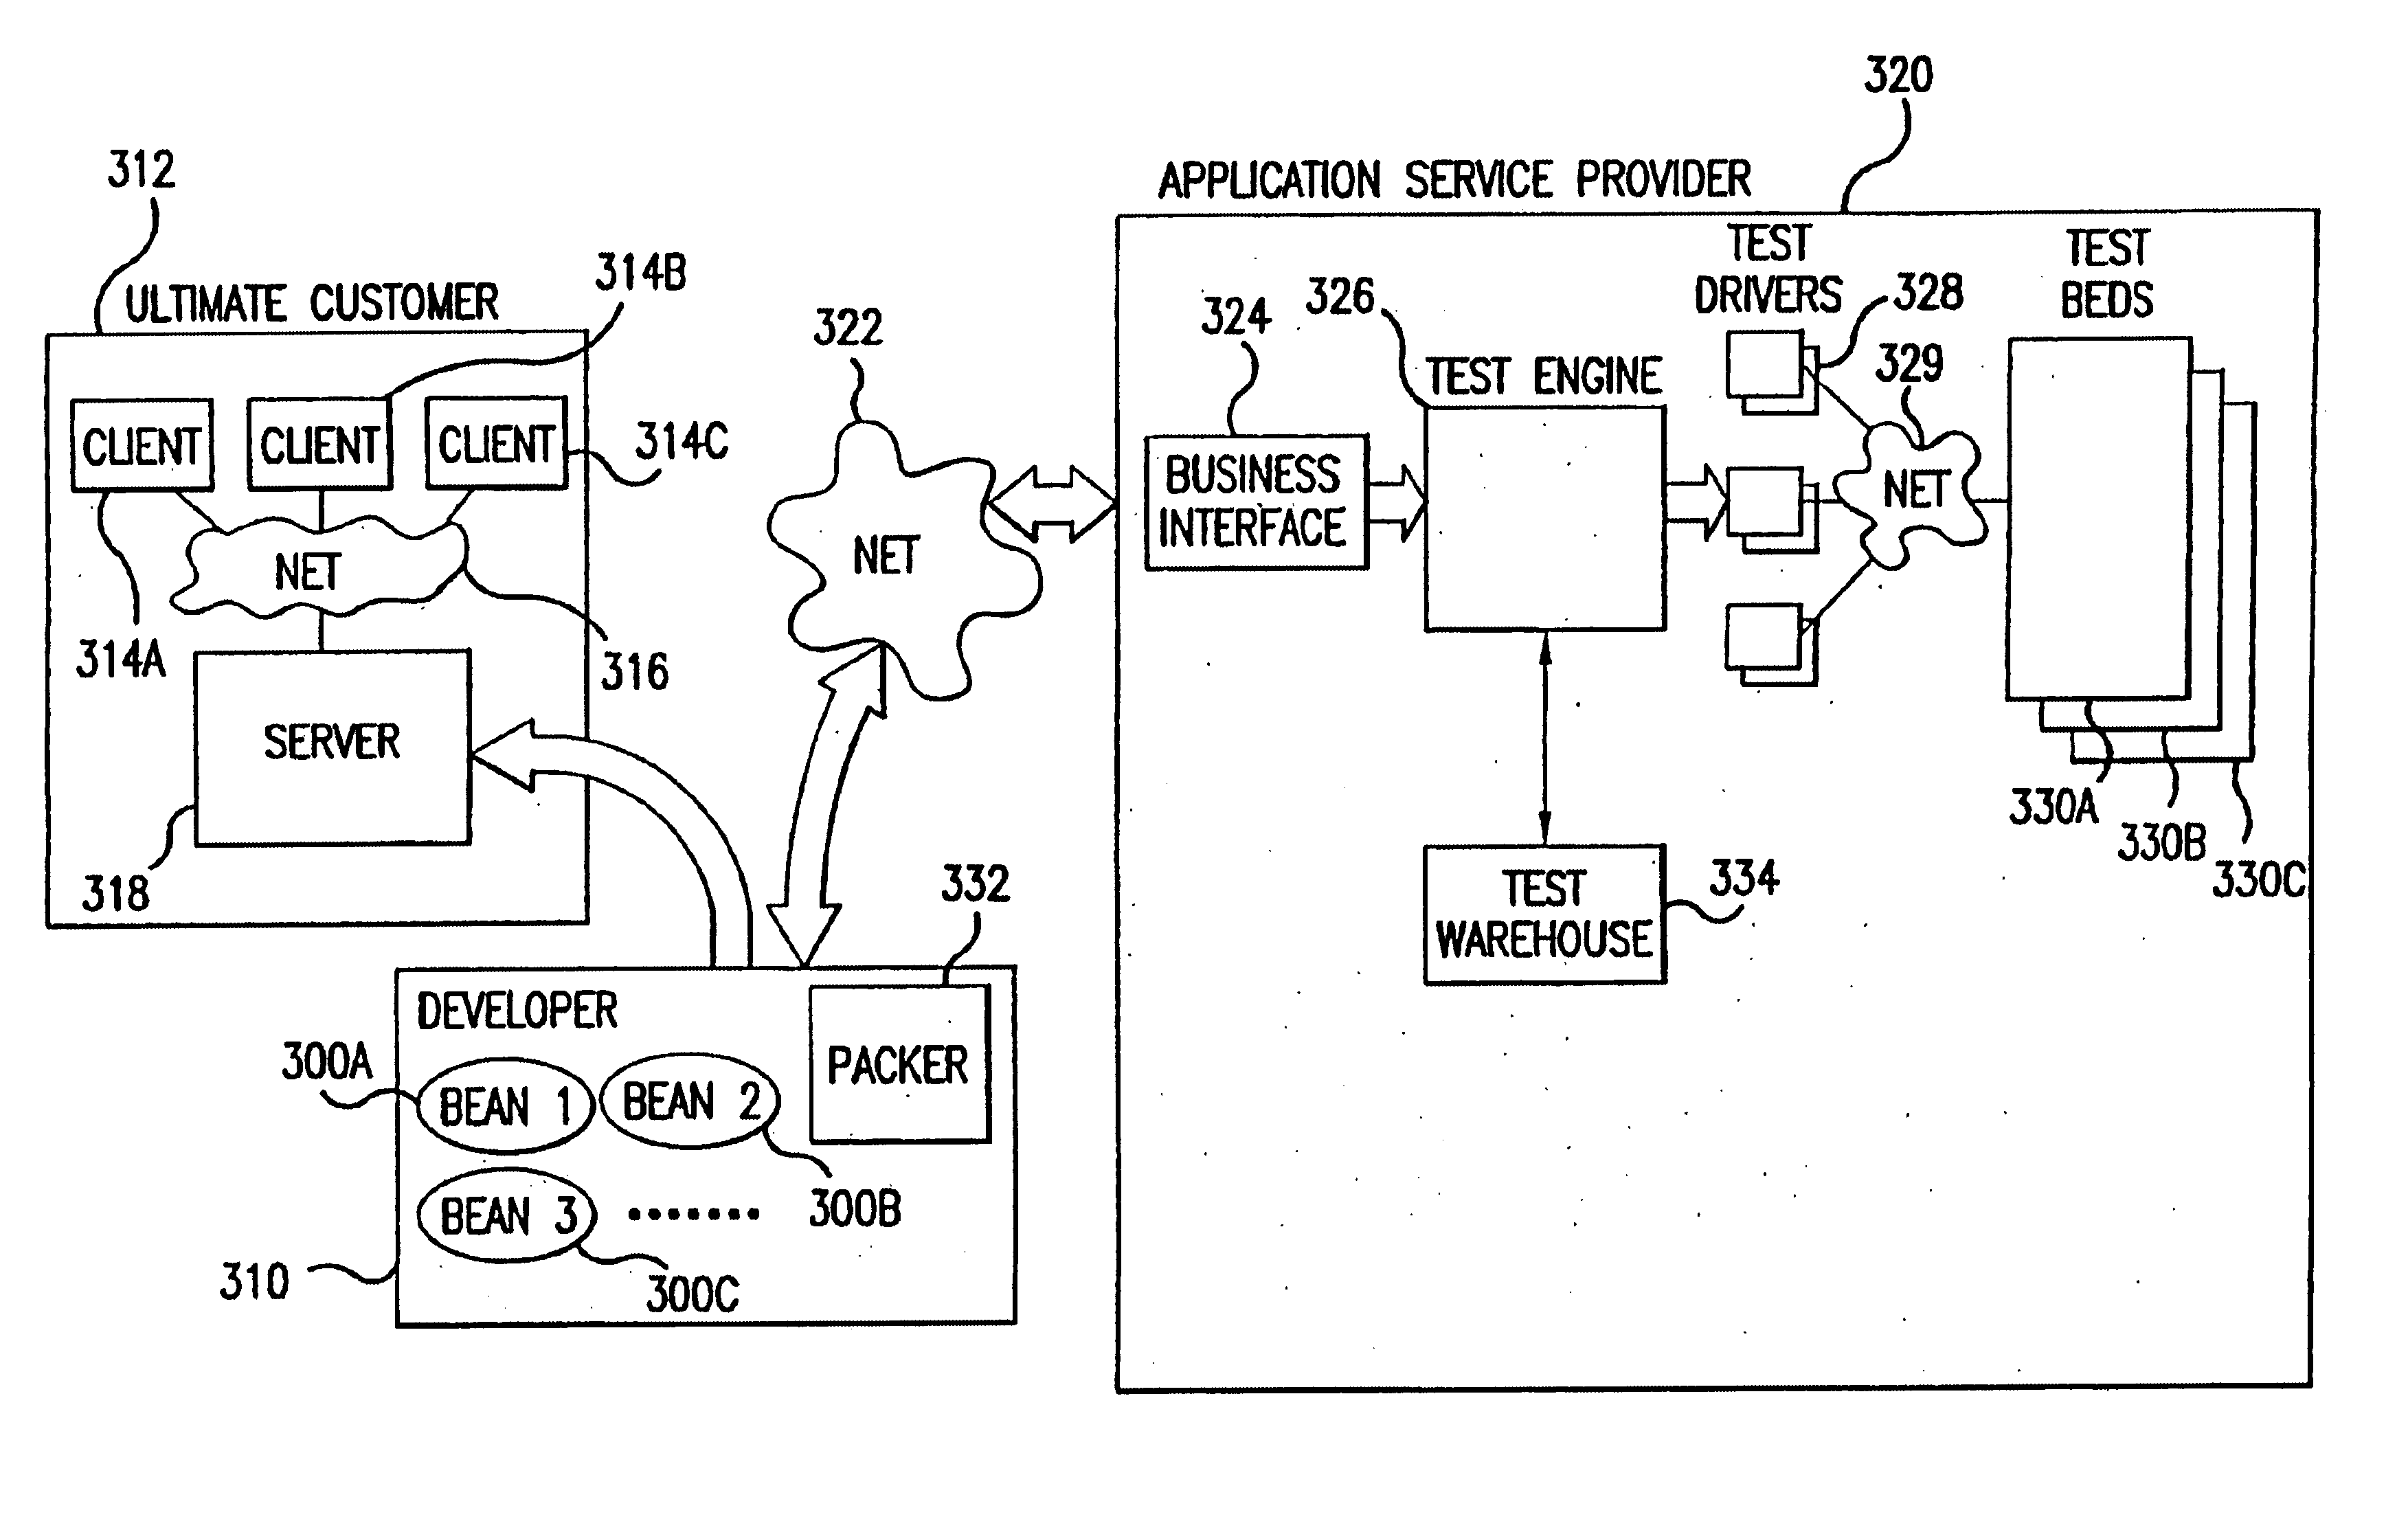 Method of providing software testing services